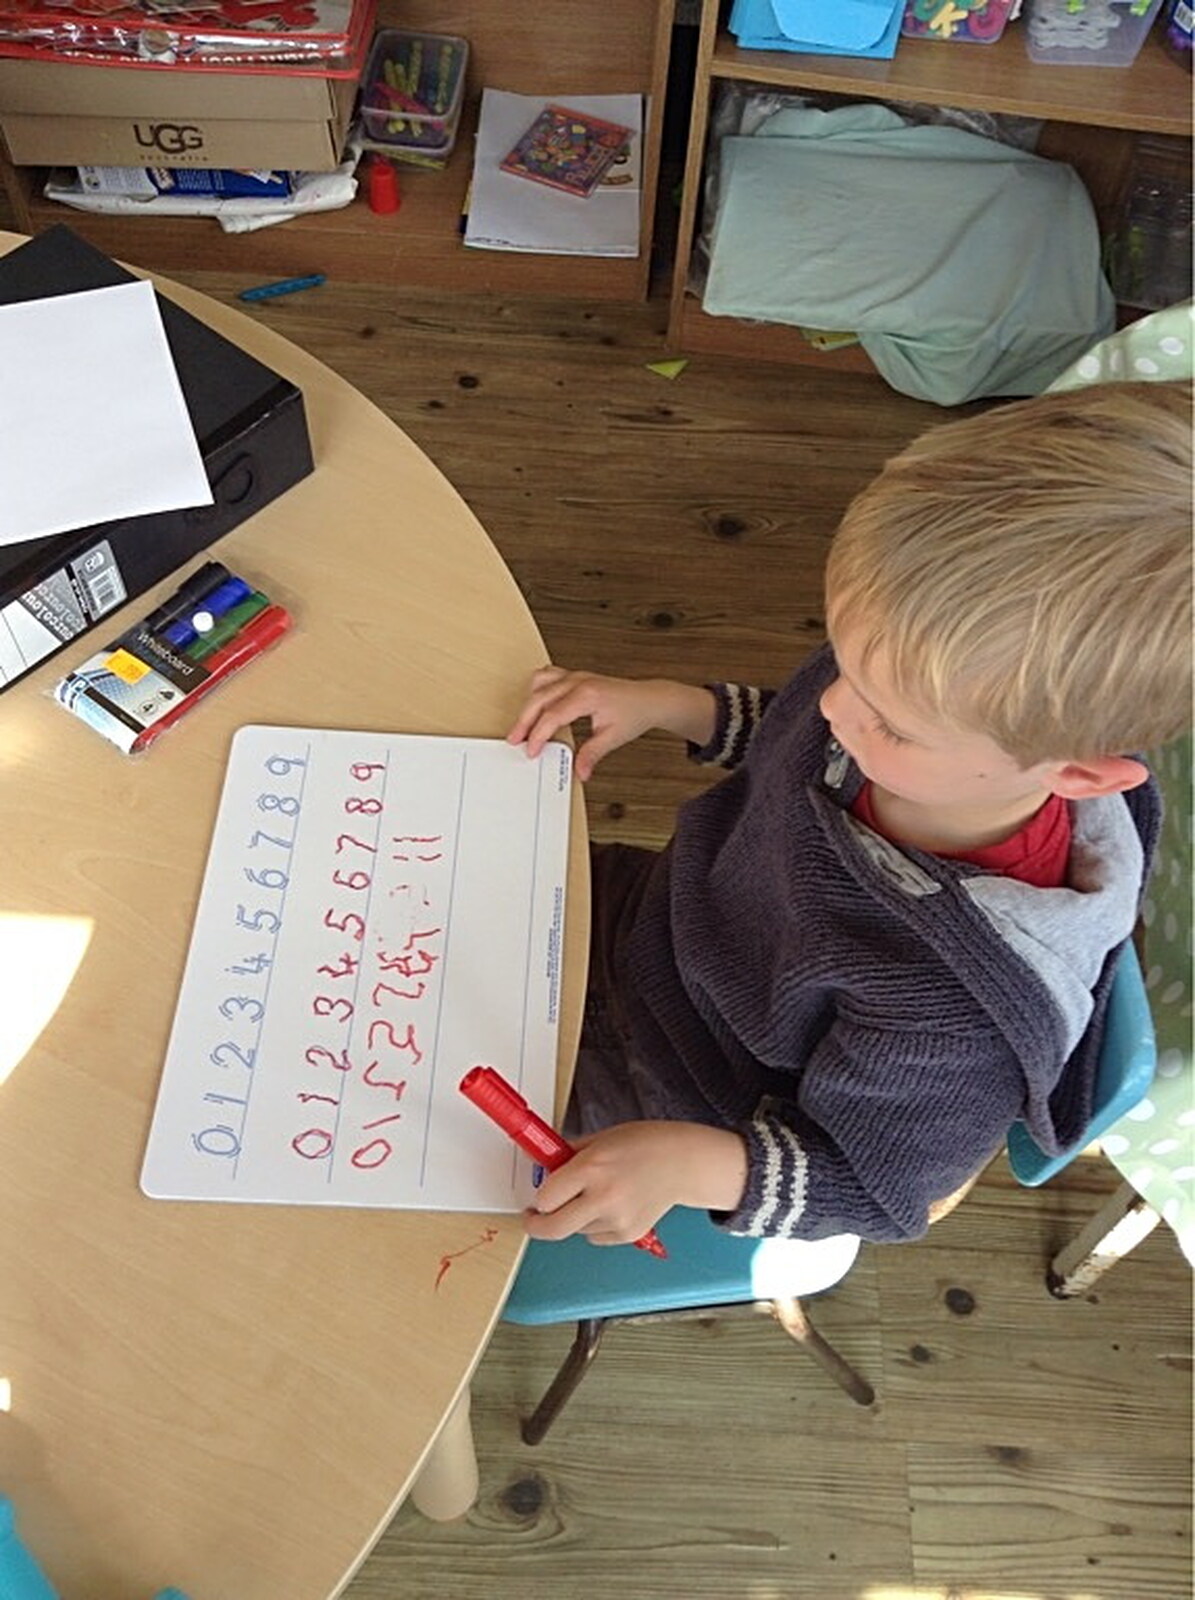 Harry learns to write numbers from Harry's Nursery Life, Mulberry Bush, Eye, Suffolk - 8th July 2016